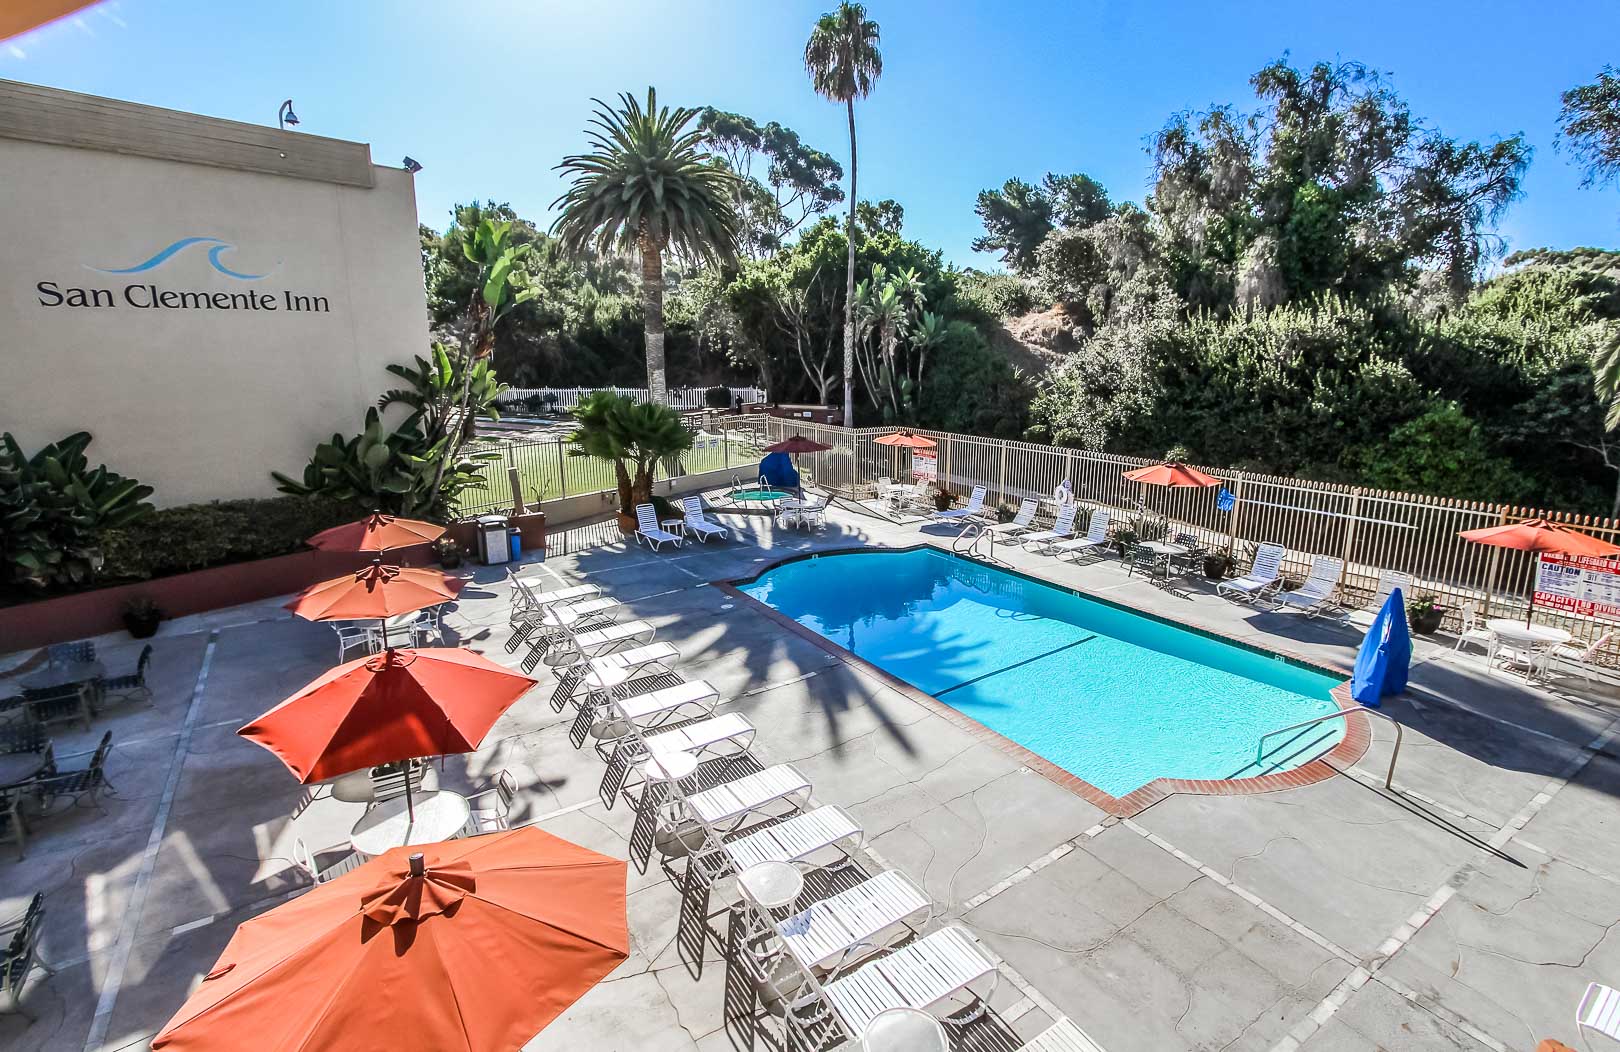 A relaxing outdoor swimming pool at VRI's San Clemente Inn in California.